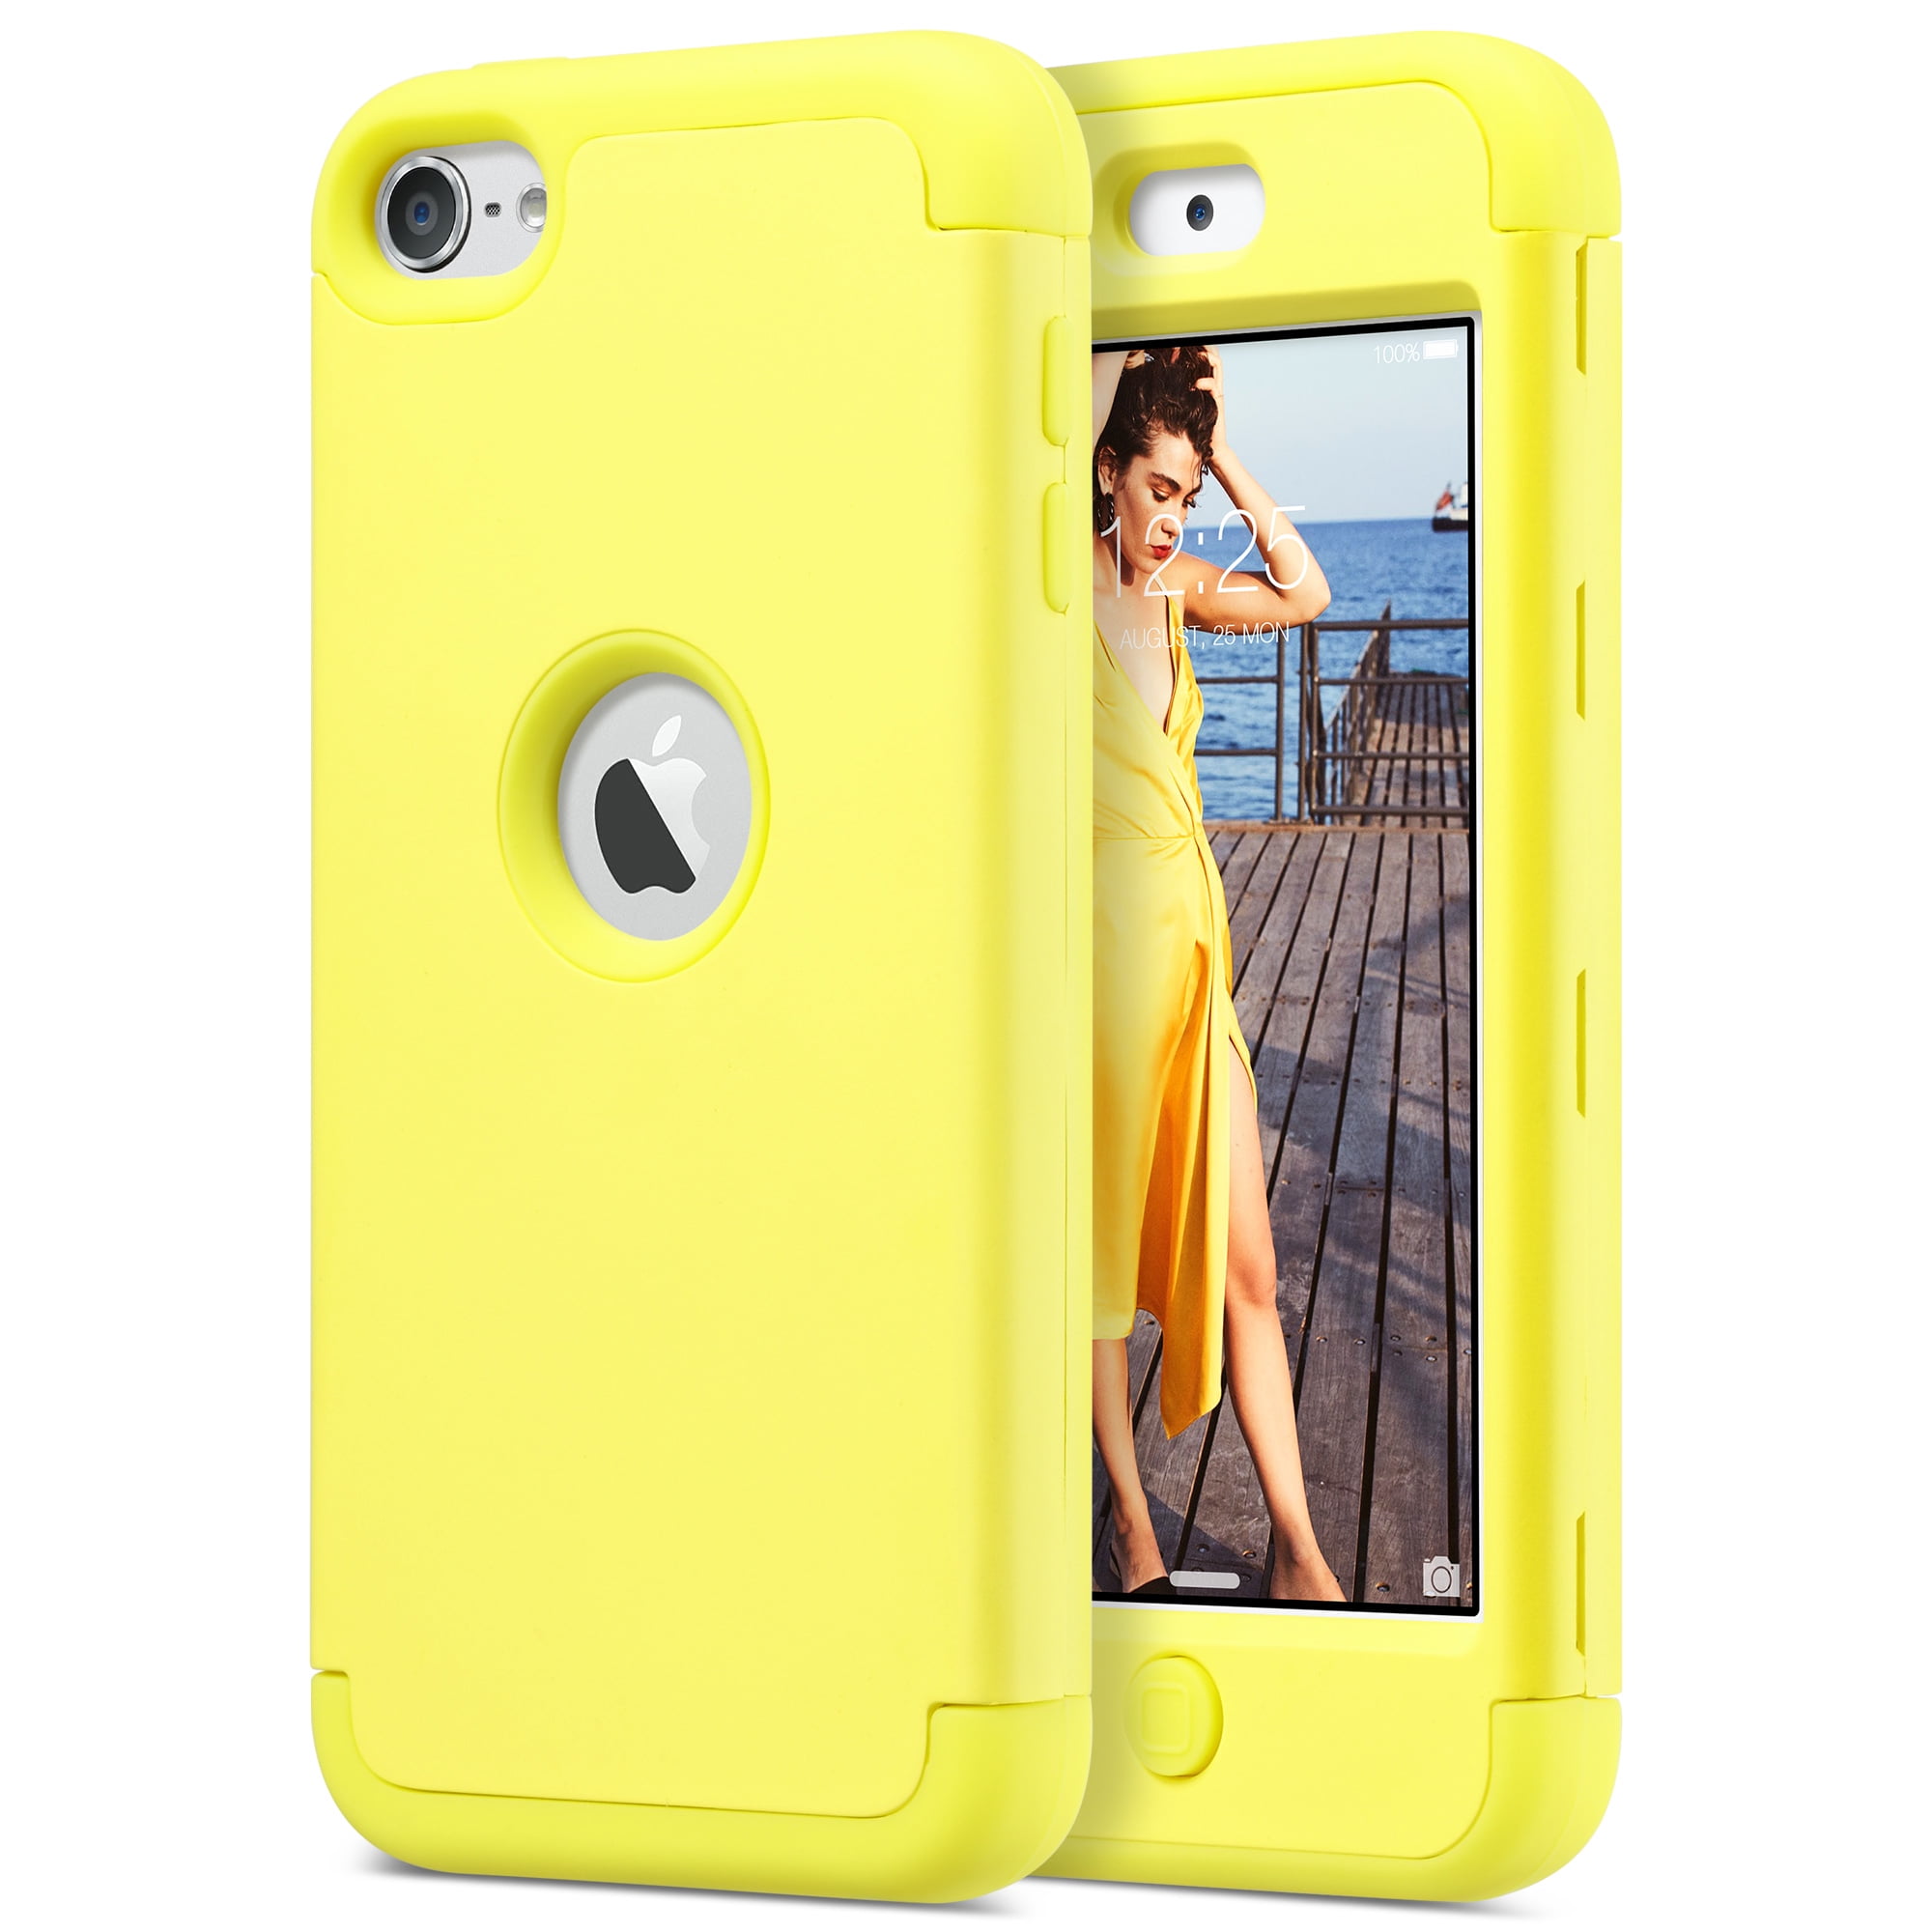 Hard & Soft Rubber Hybrid Armor Impact Case Skin For iPod Touch 5th & 6th Gen 